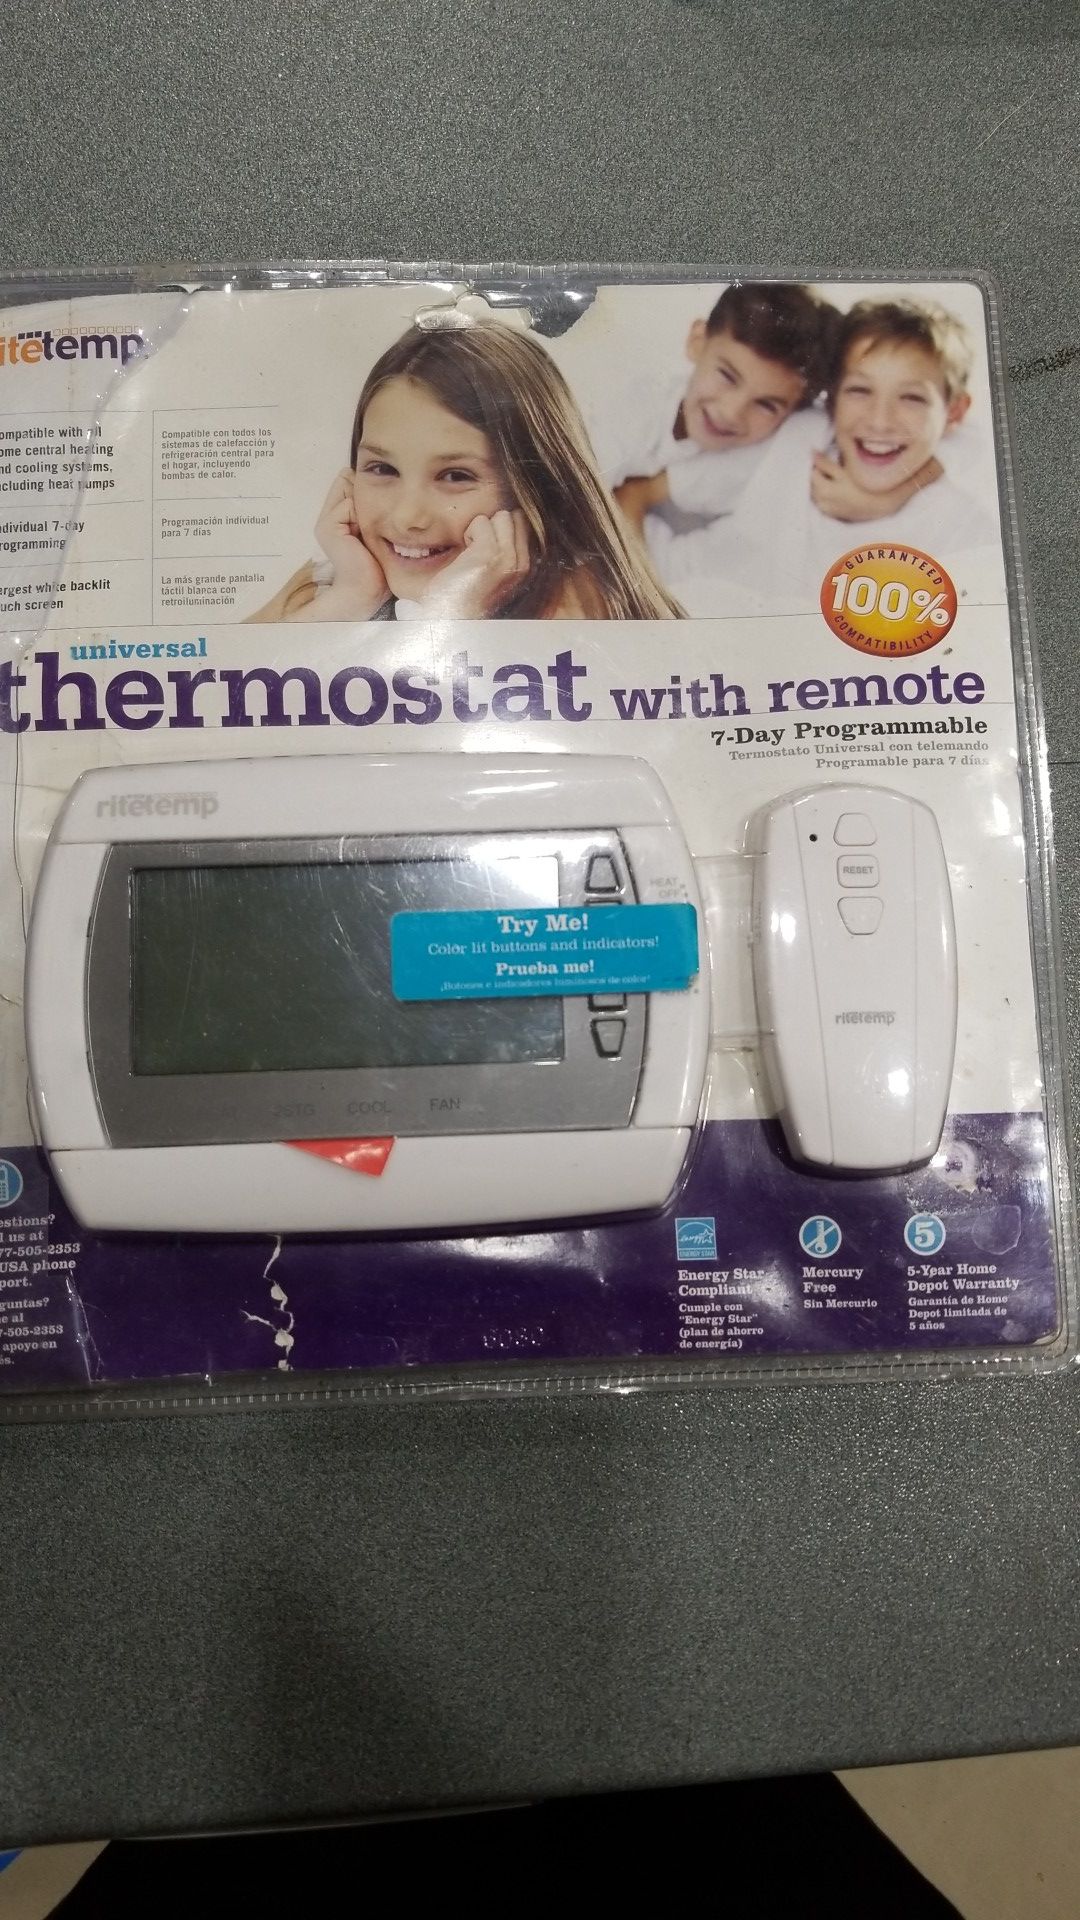 Universal programmable thermostat with remote control By Ritetemp sold at home depot